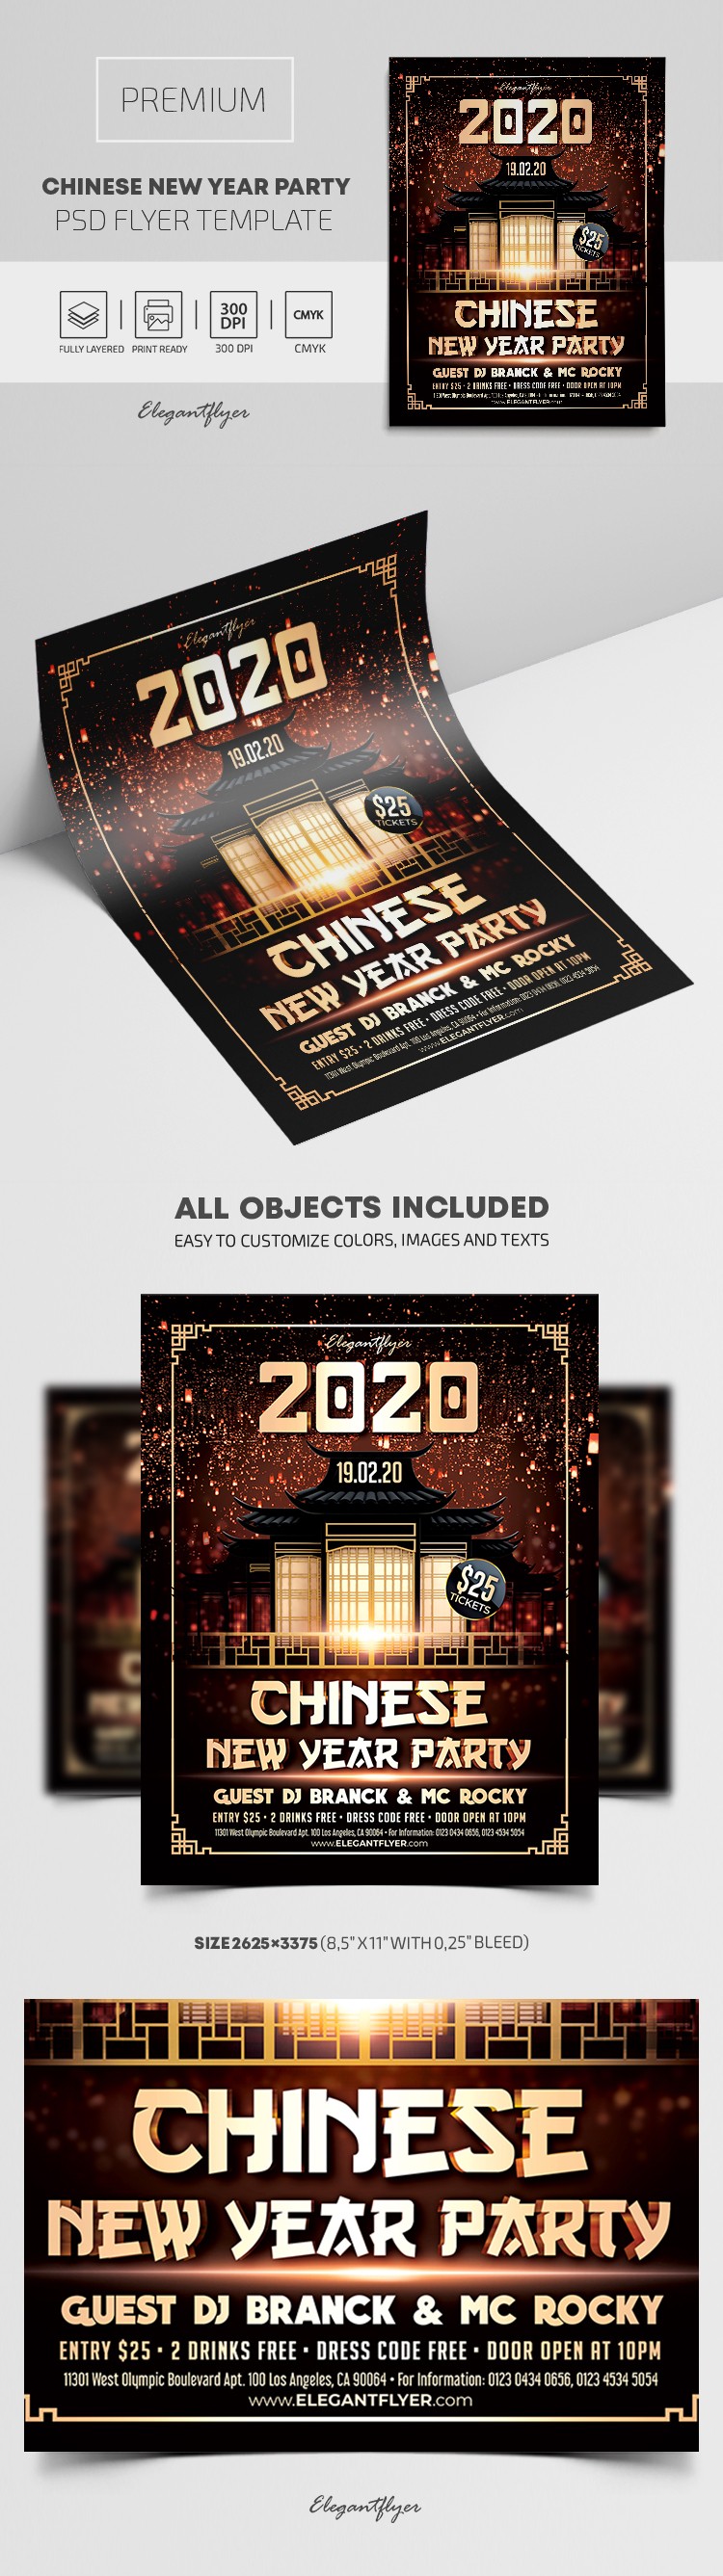 2020 Chinese New Year Party by ElegantFlyer